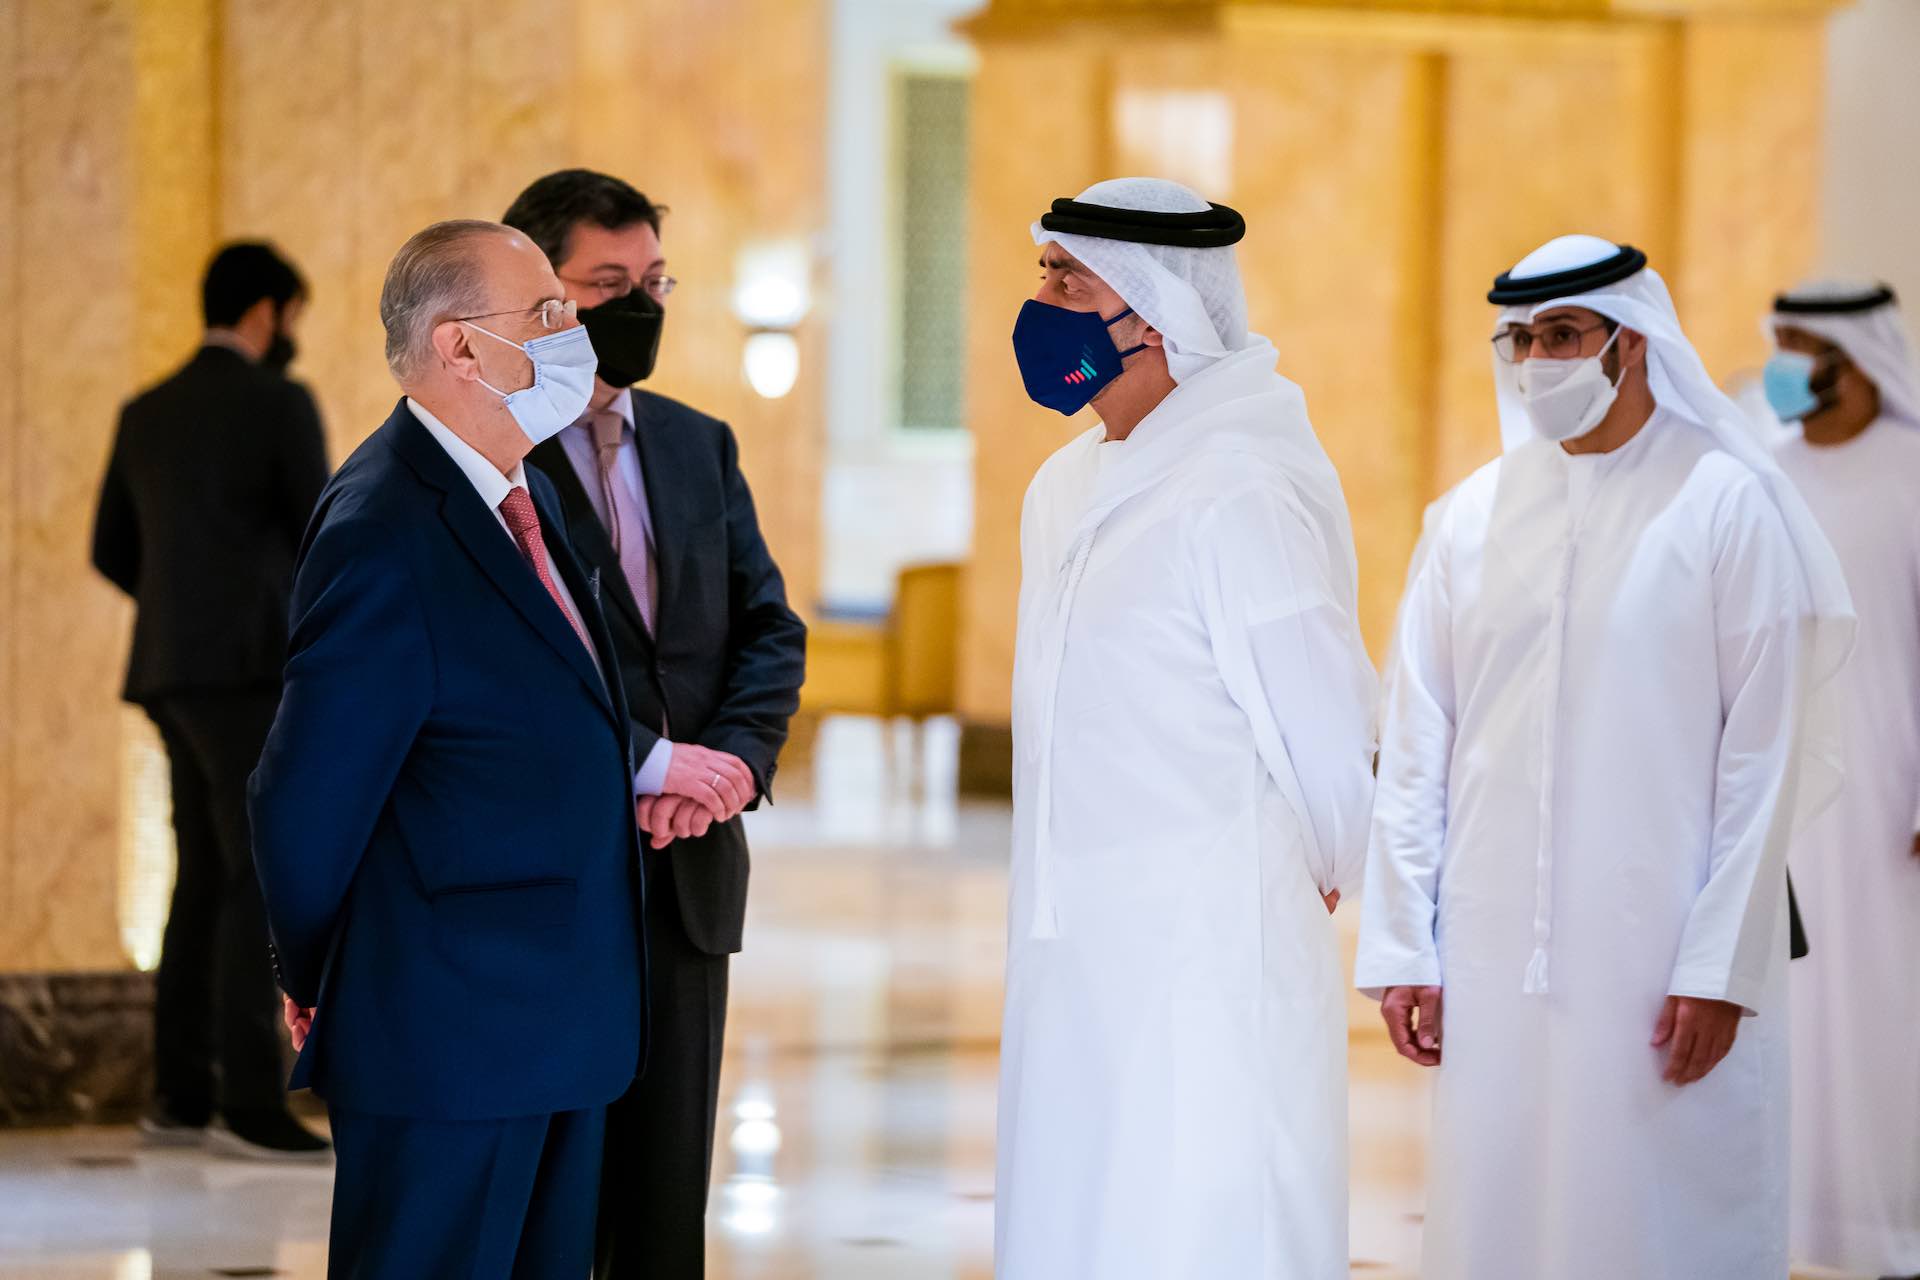 Foreign ministers of the UAE and Cyprus discuss improving relations